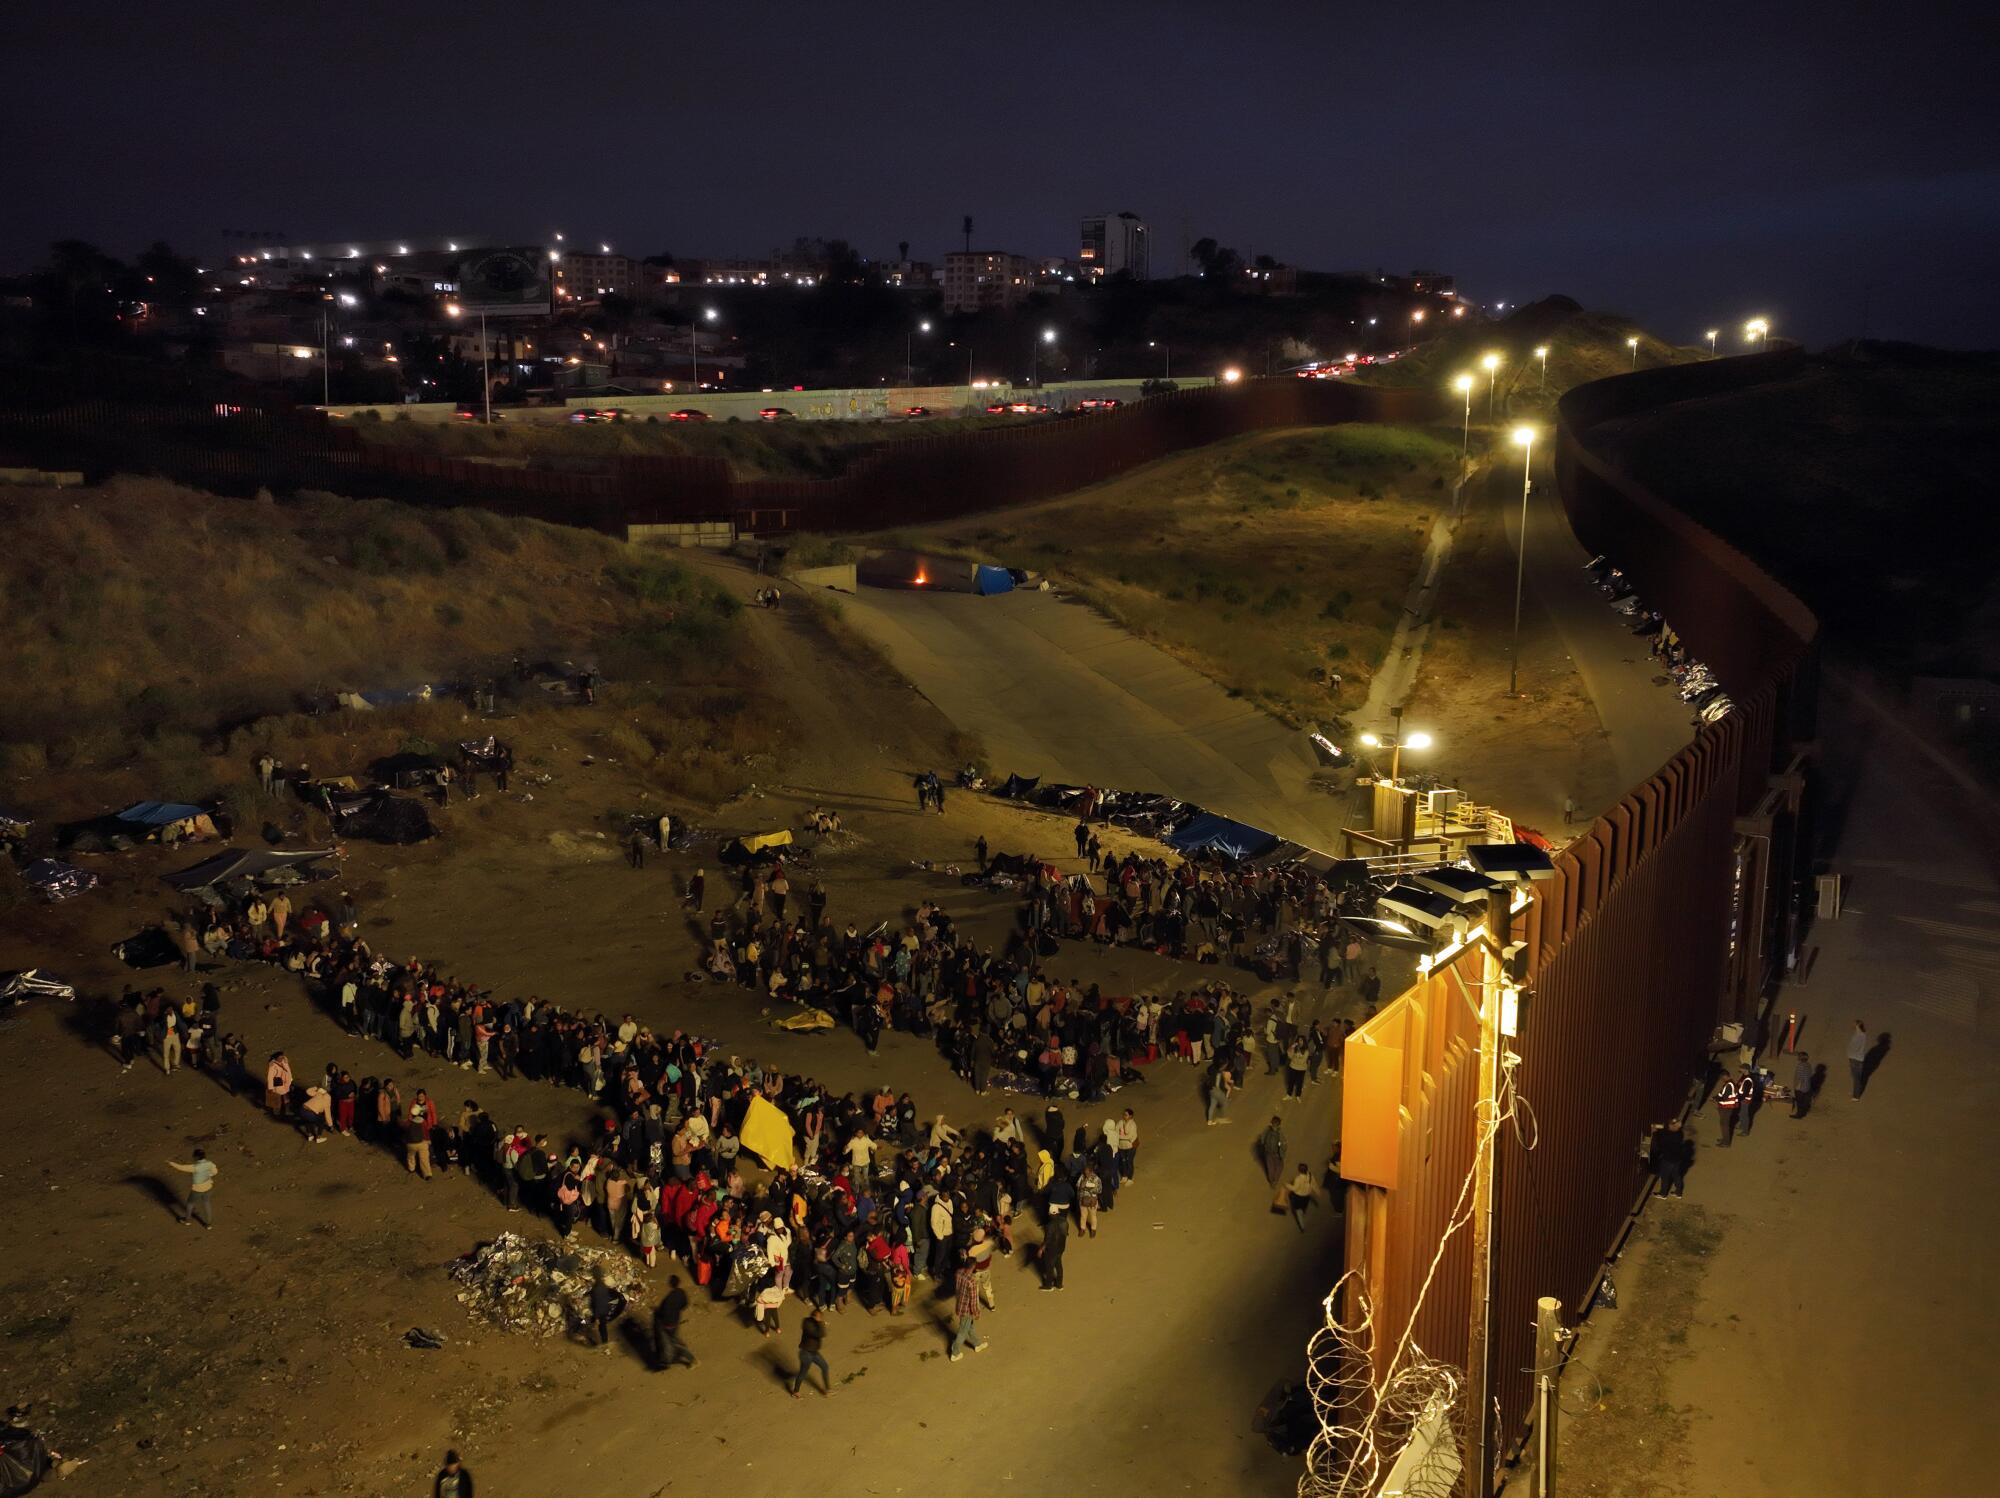 Migrants hoping to cross into the United States from Tijuana wait in an area north of the city.